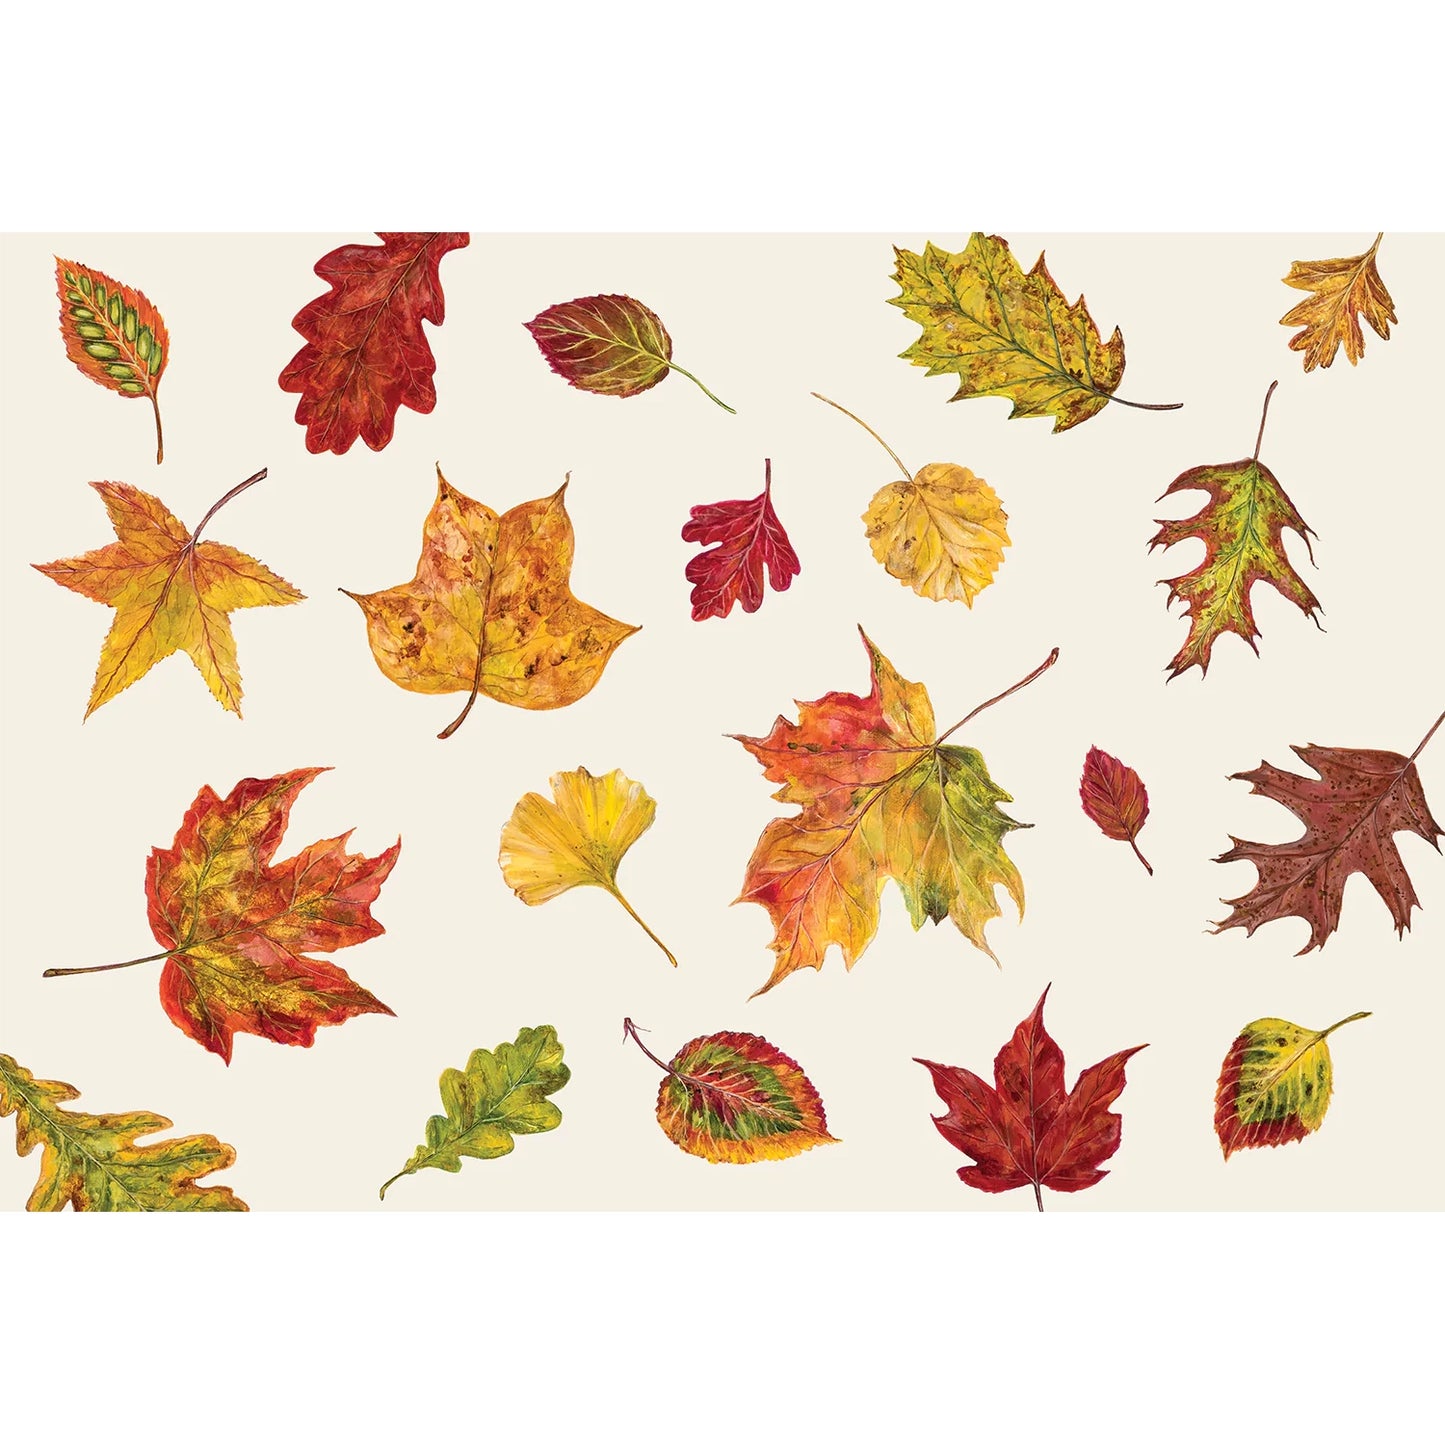 A close up look at the fall Foliage leaf paper placemat